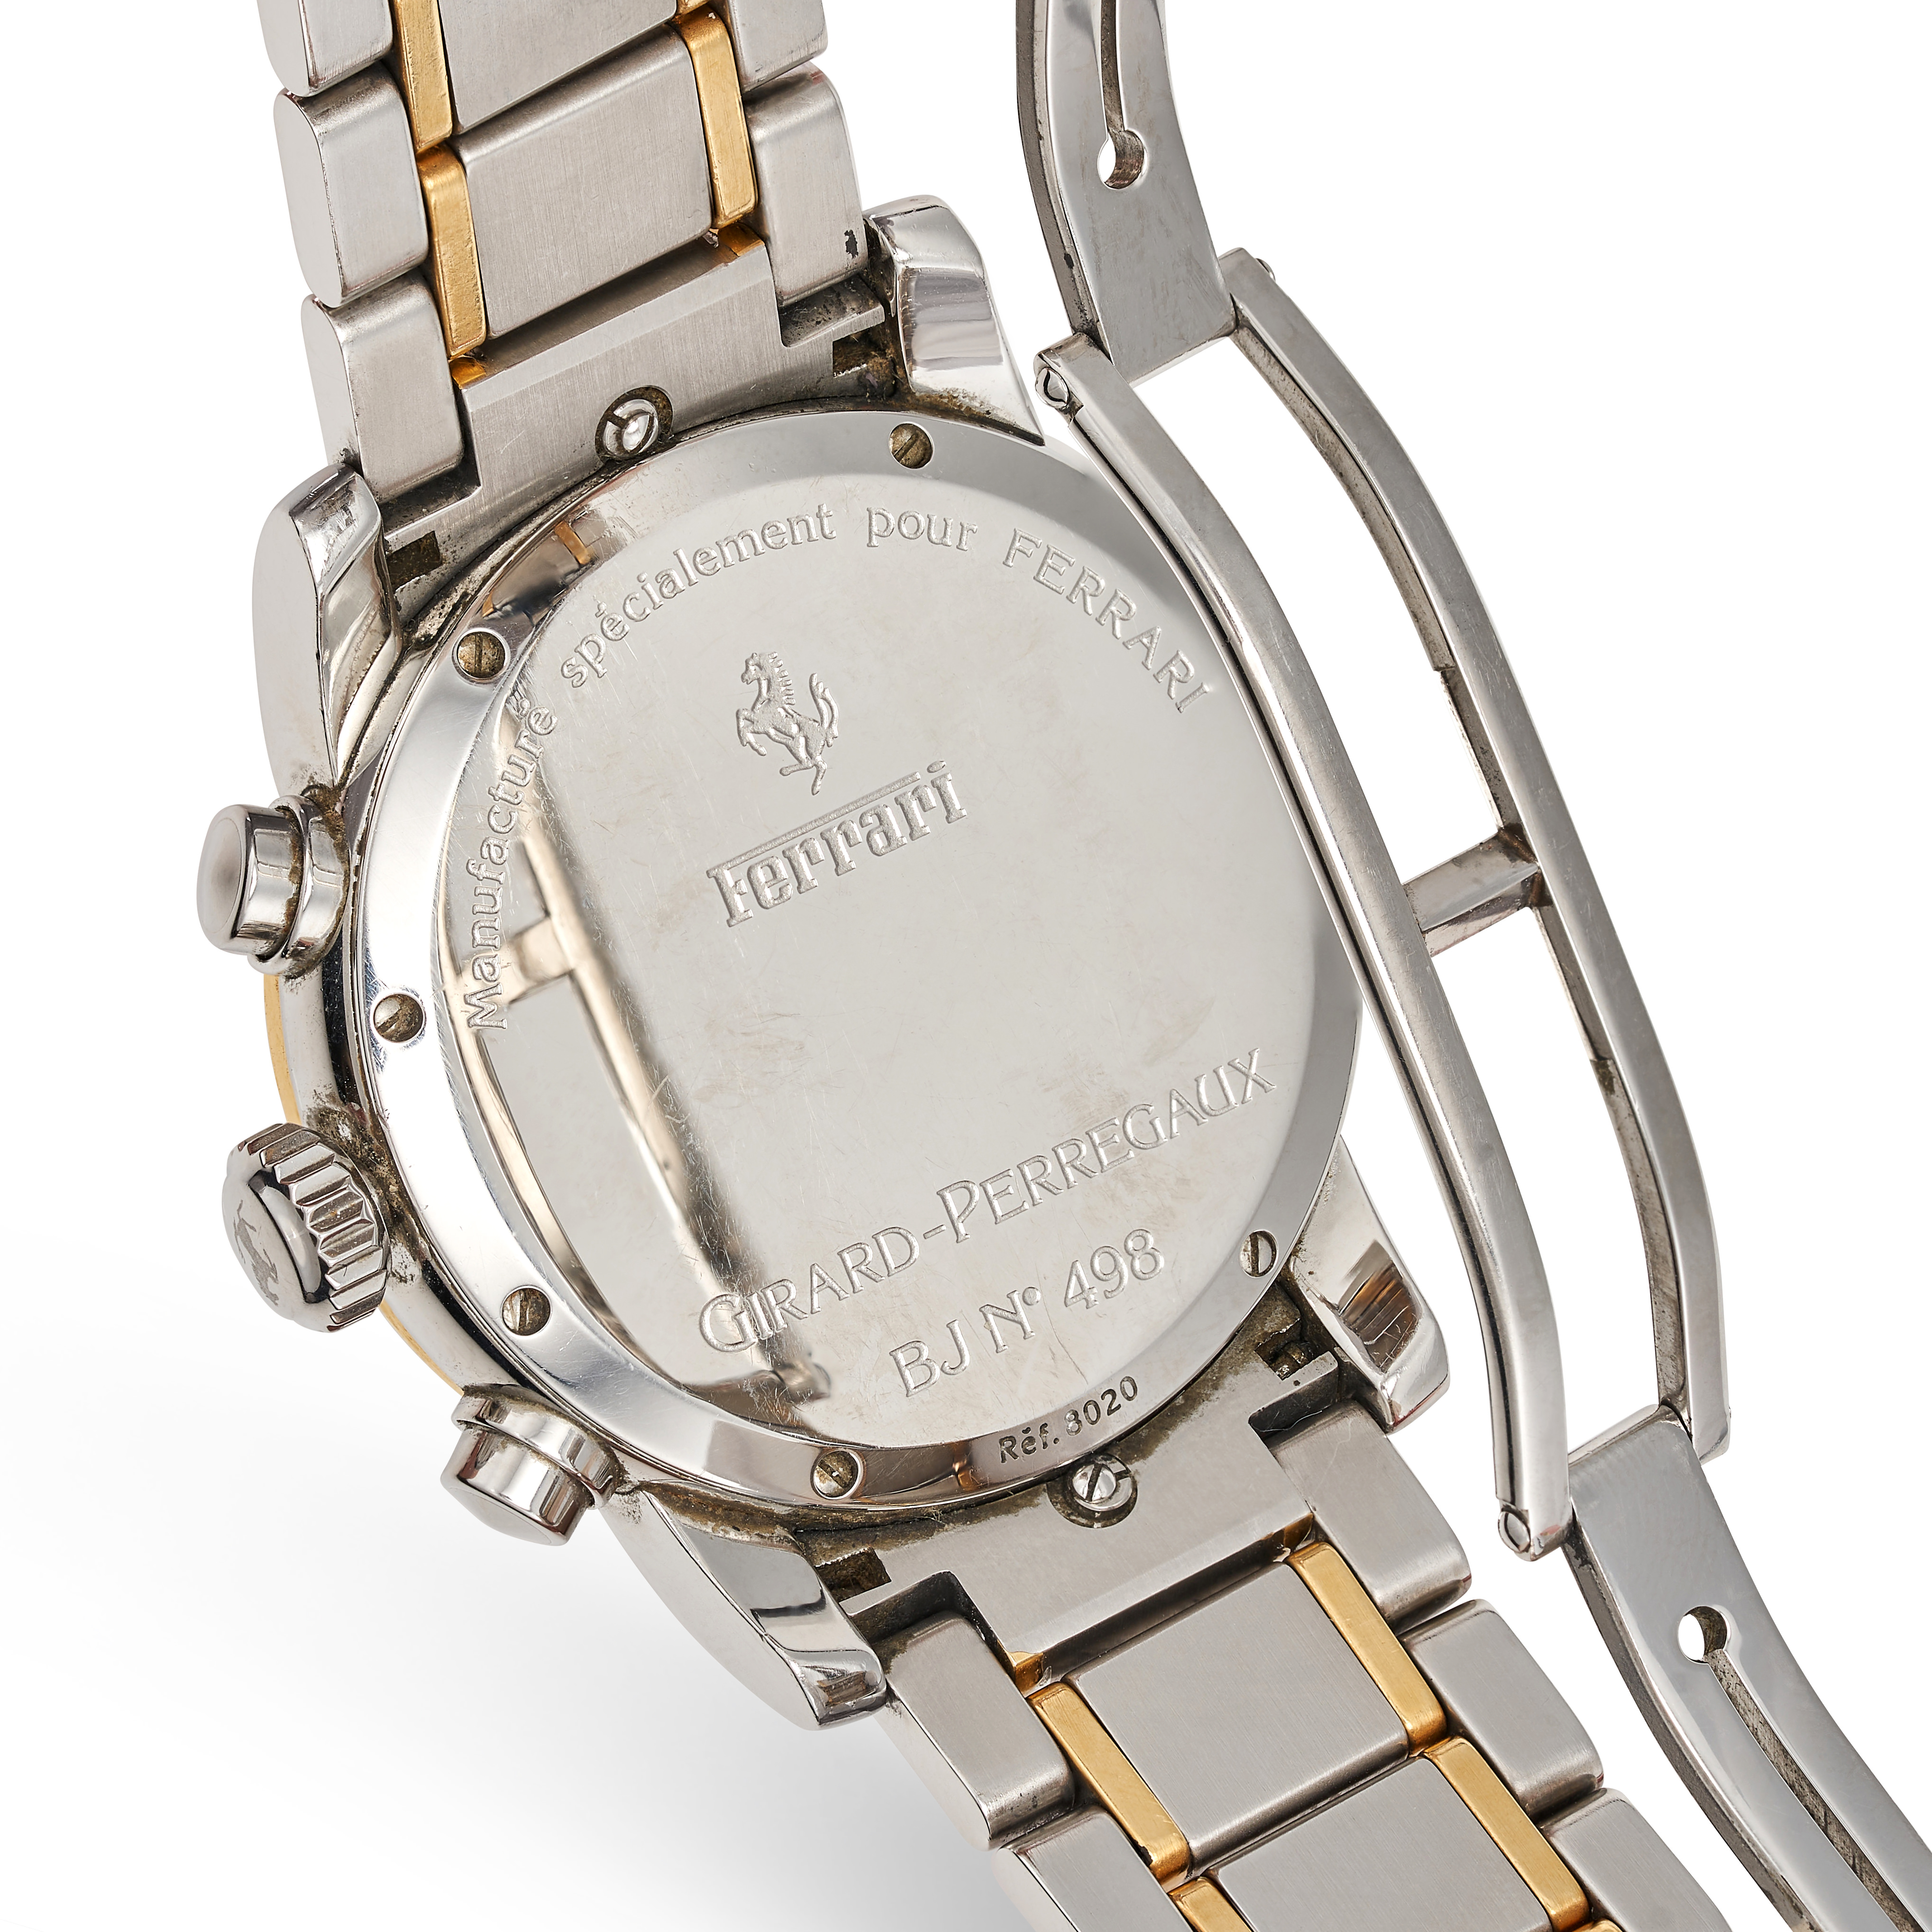 GIRARD-PERREGAUX, A FERRARI CHRONOGRAPH DATE WRISTWATCH in stainless steel and gold plate, model ... - Image 2 of 2